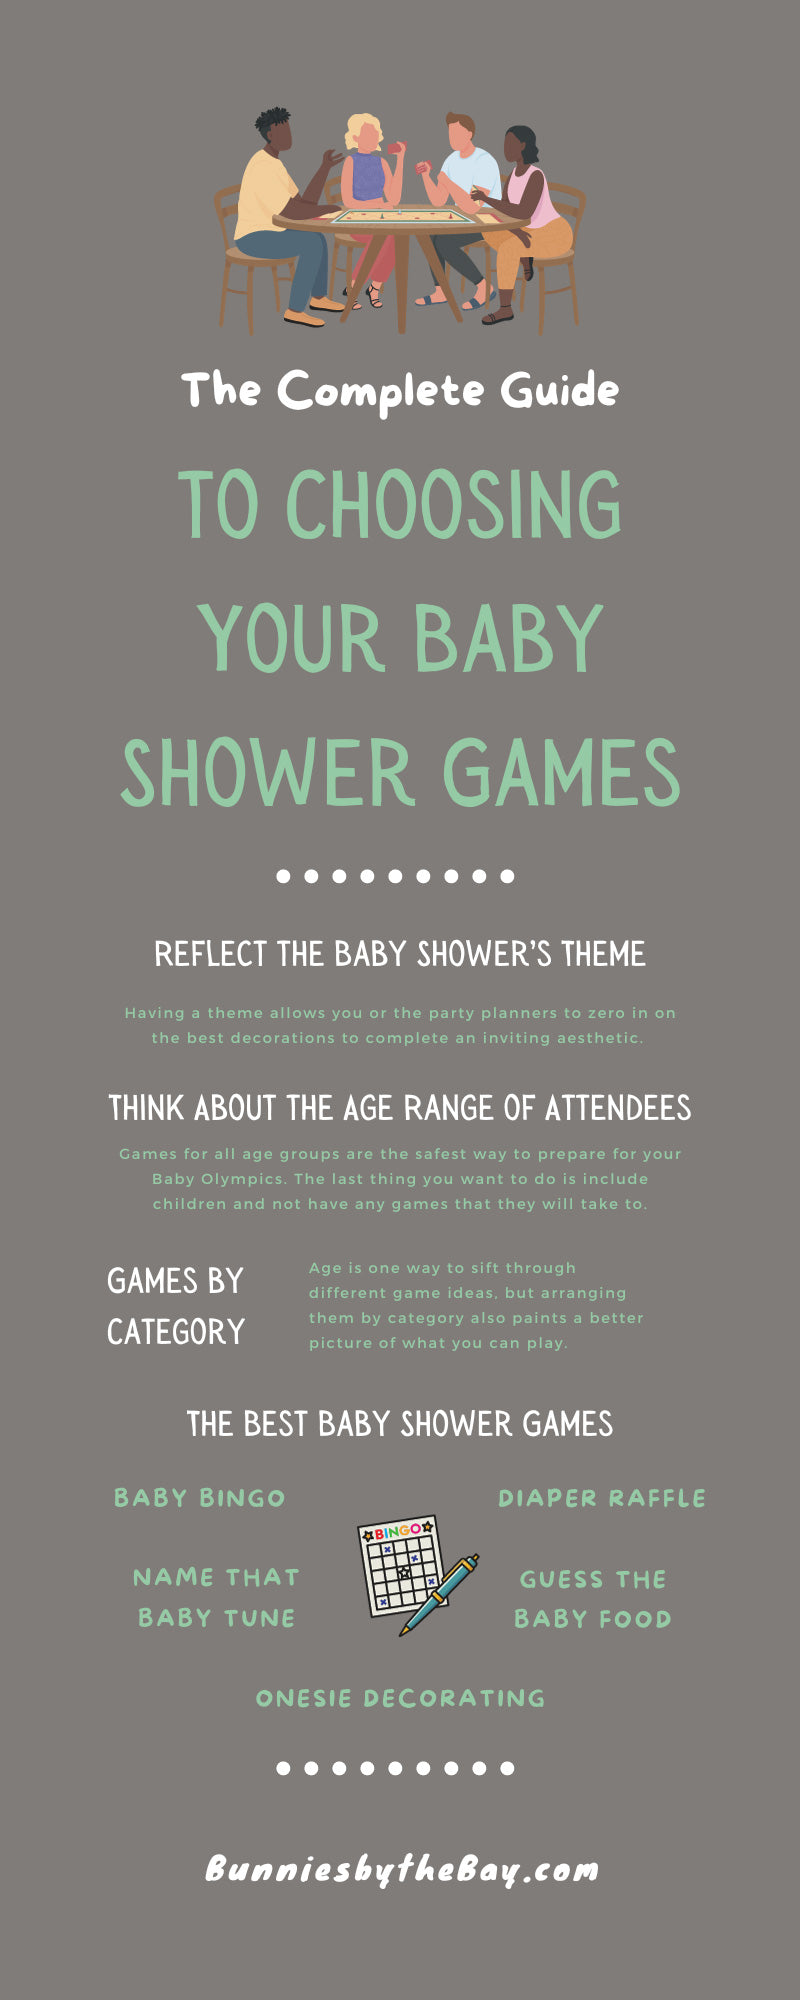 The Complete Guide to Choosing Your Baby Shower Games